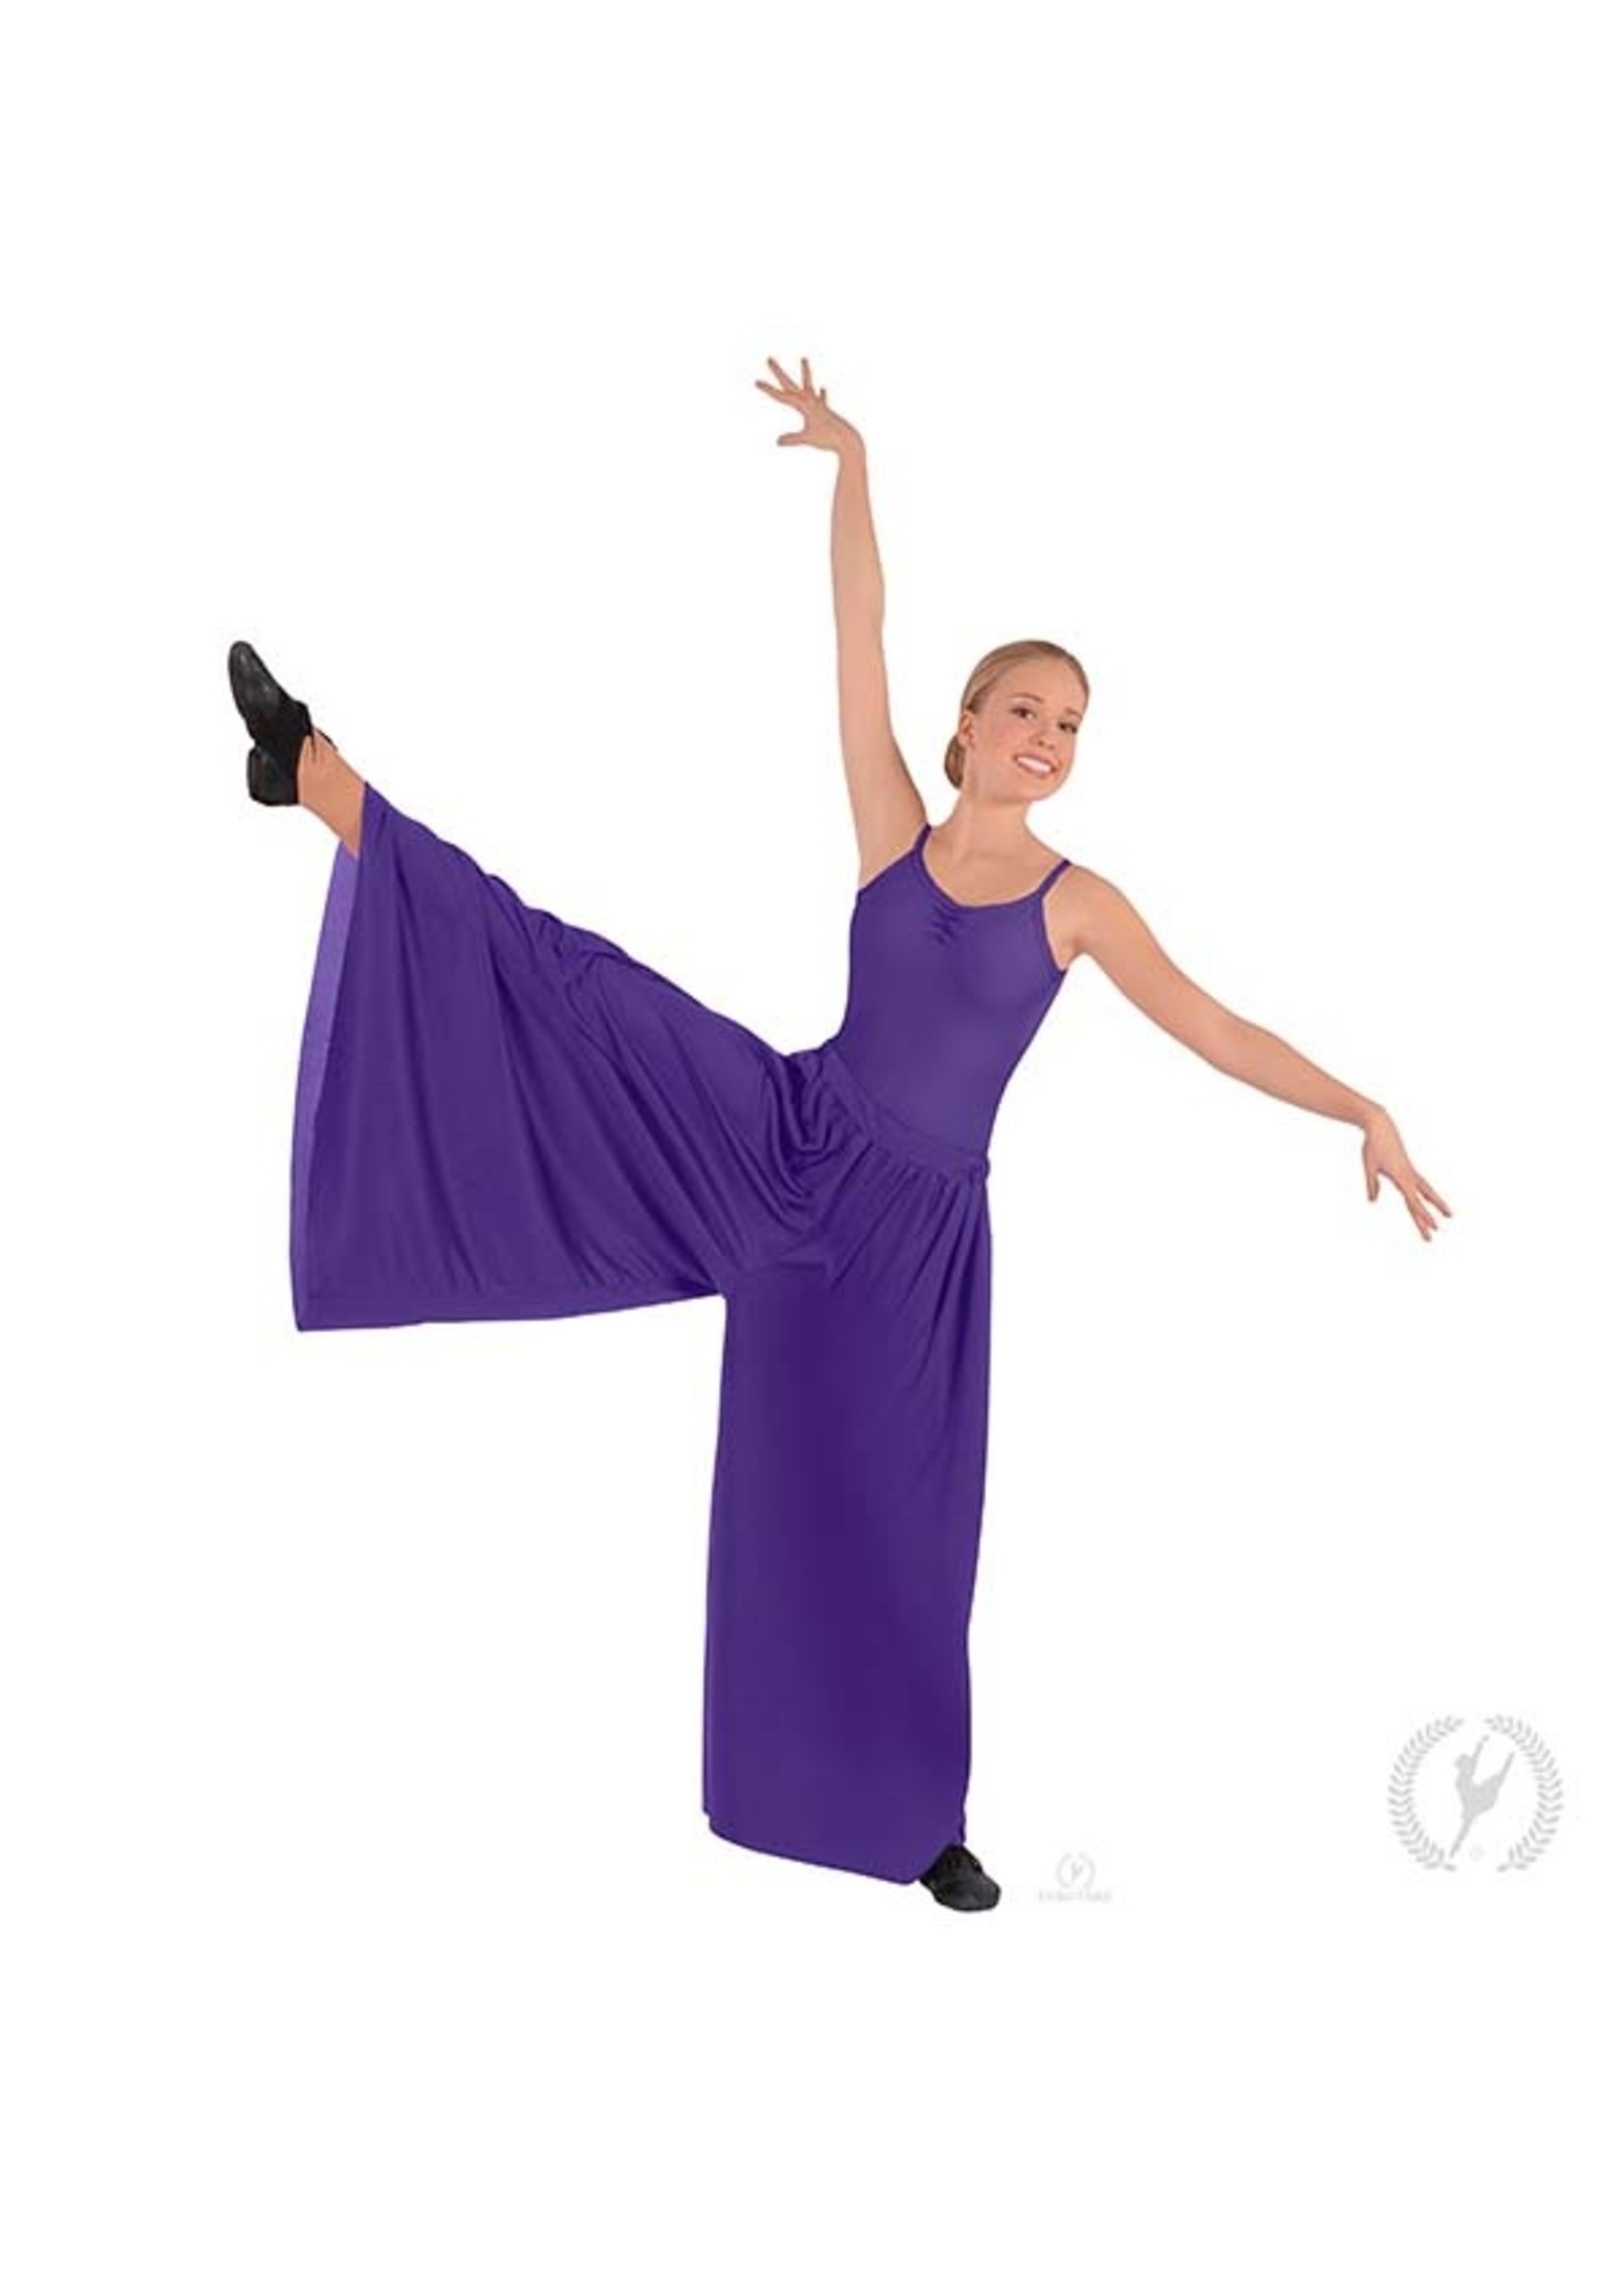 Adult liturgical praise dance palazzo pants (white) in Houston